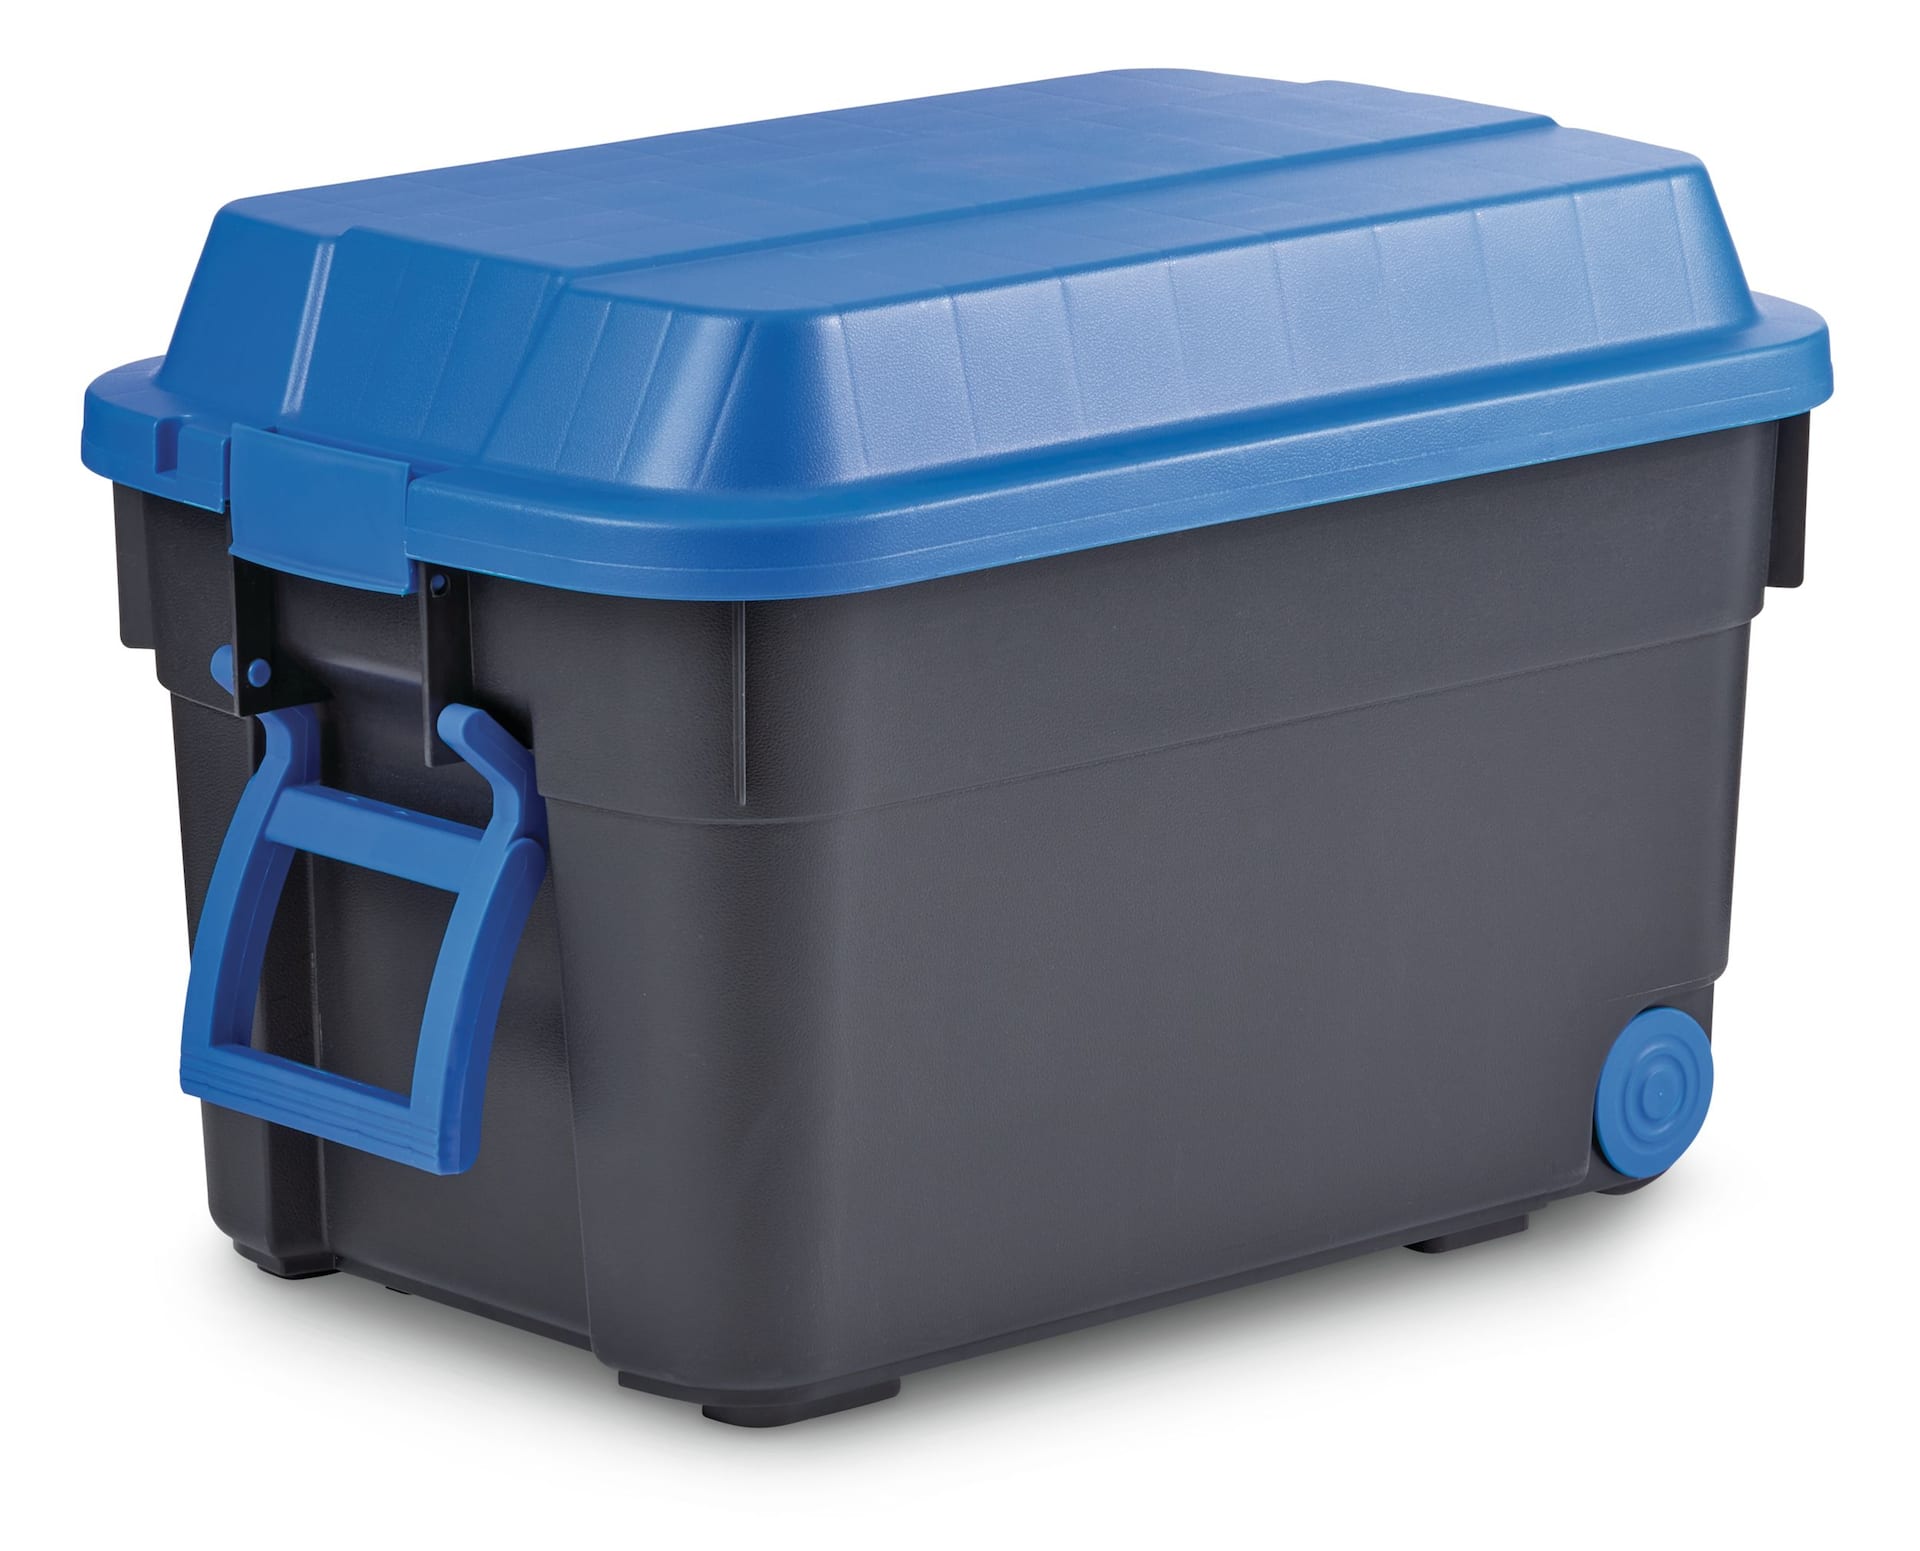 Mastercraft Heavy Duty Tilt & Tow Storage Box with Wheels and Latched Lid,  95-L, Black/Blue